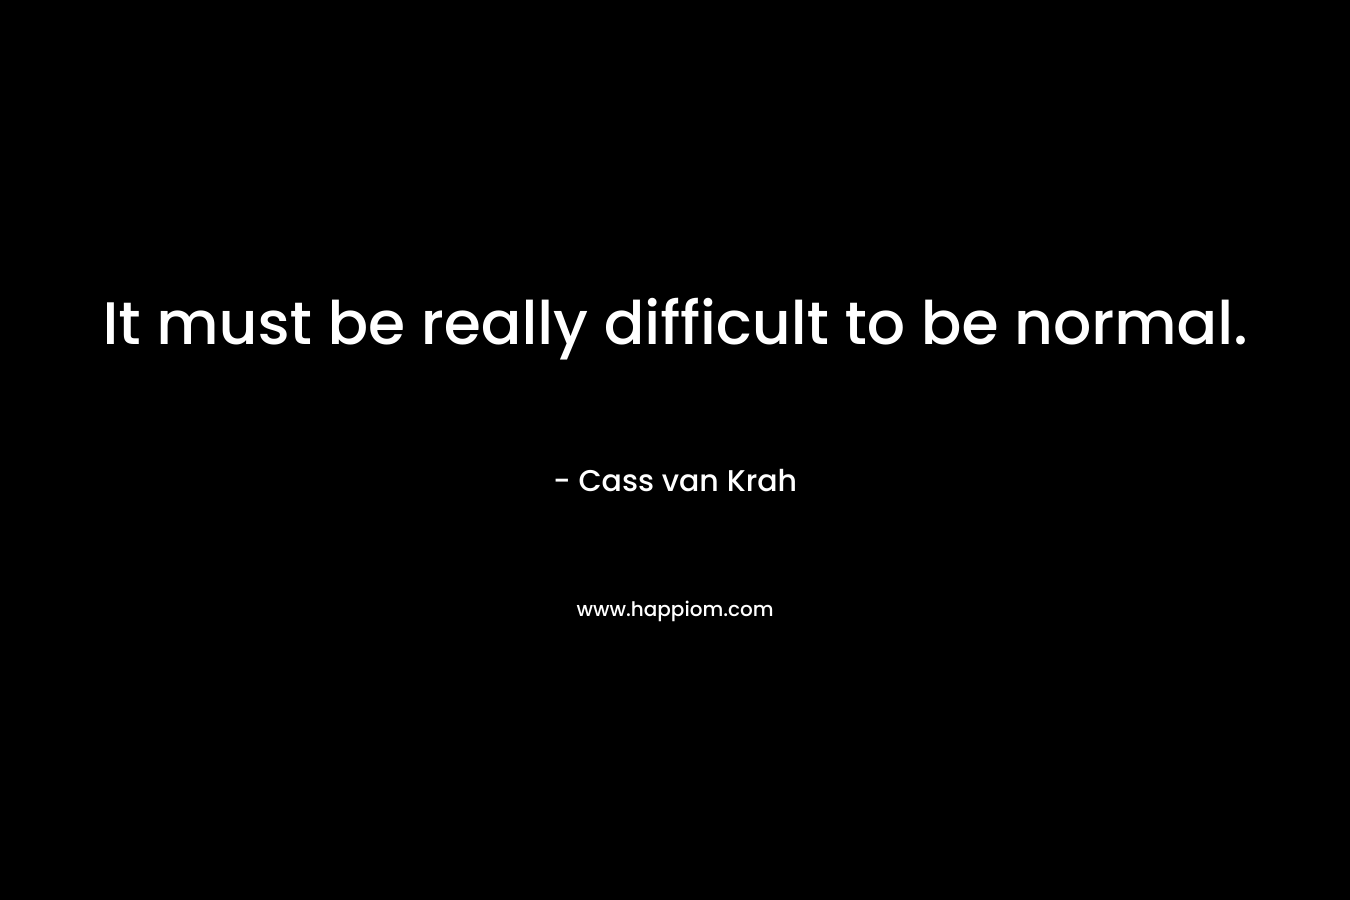 It must be really difficult to be normal. – Cass van Krah